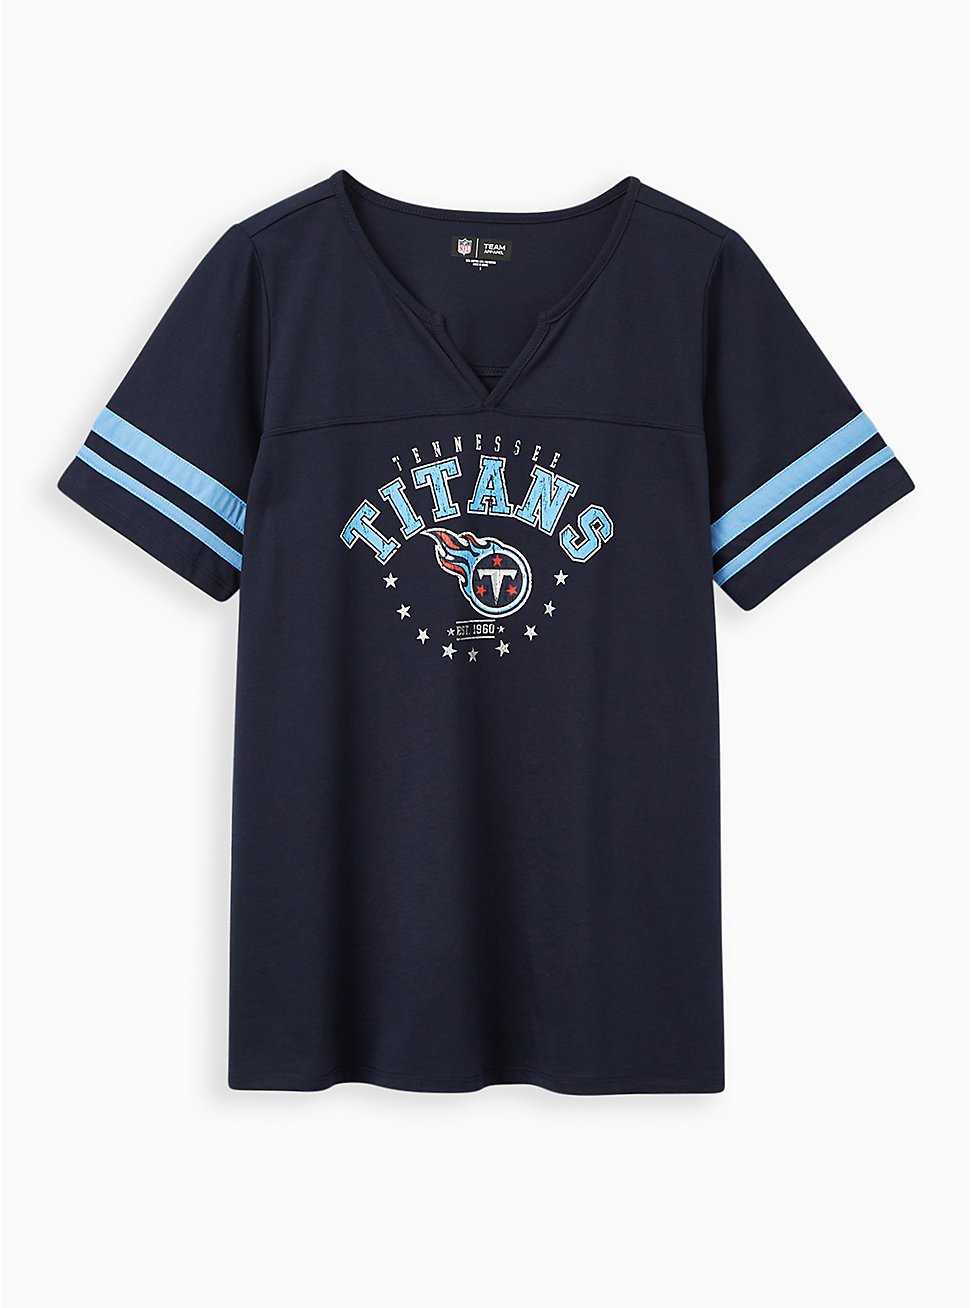 Plus Size Classic Fit Football Tee - Tennessee Titans Navy, PEACOAT, hi-res